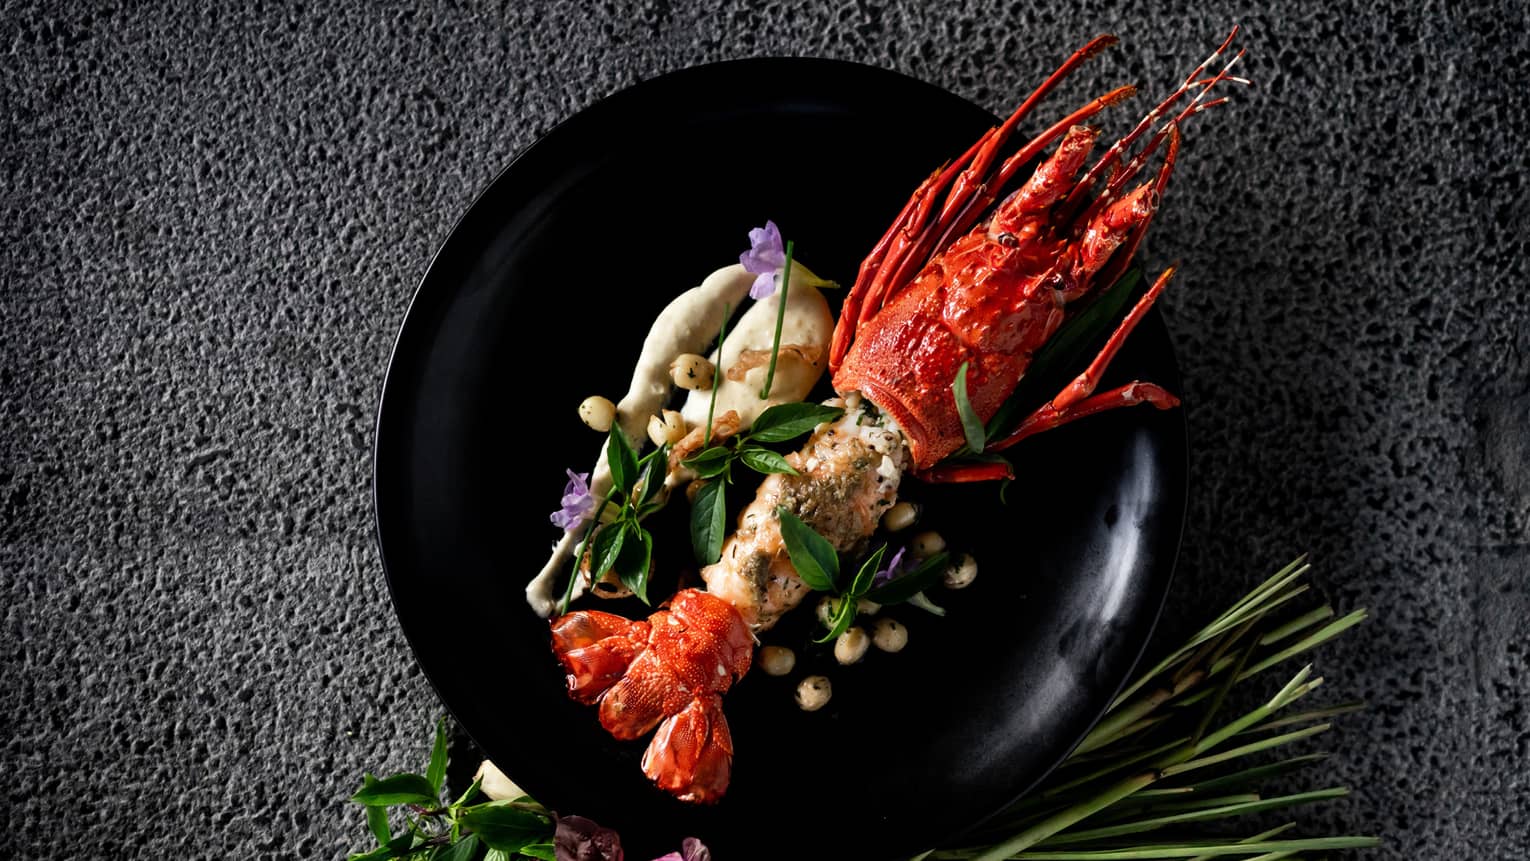 Whole lobster with herbs, sauce garnish on black plate